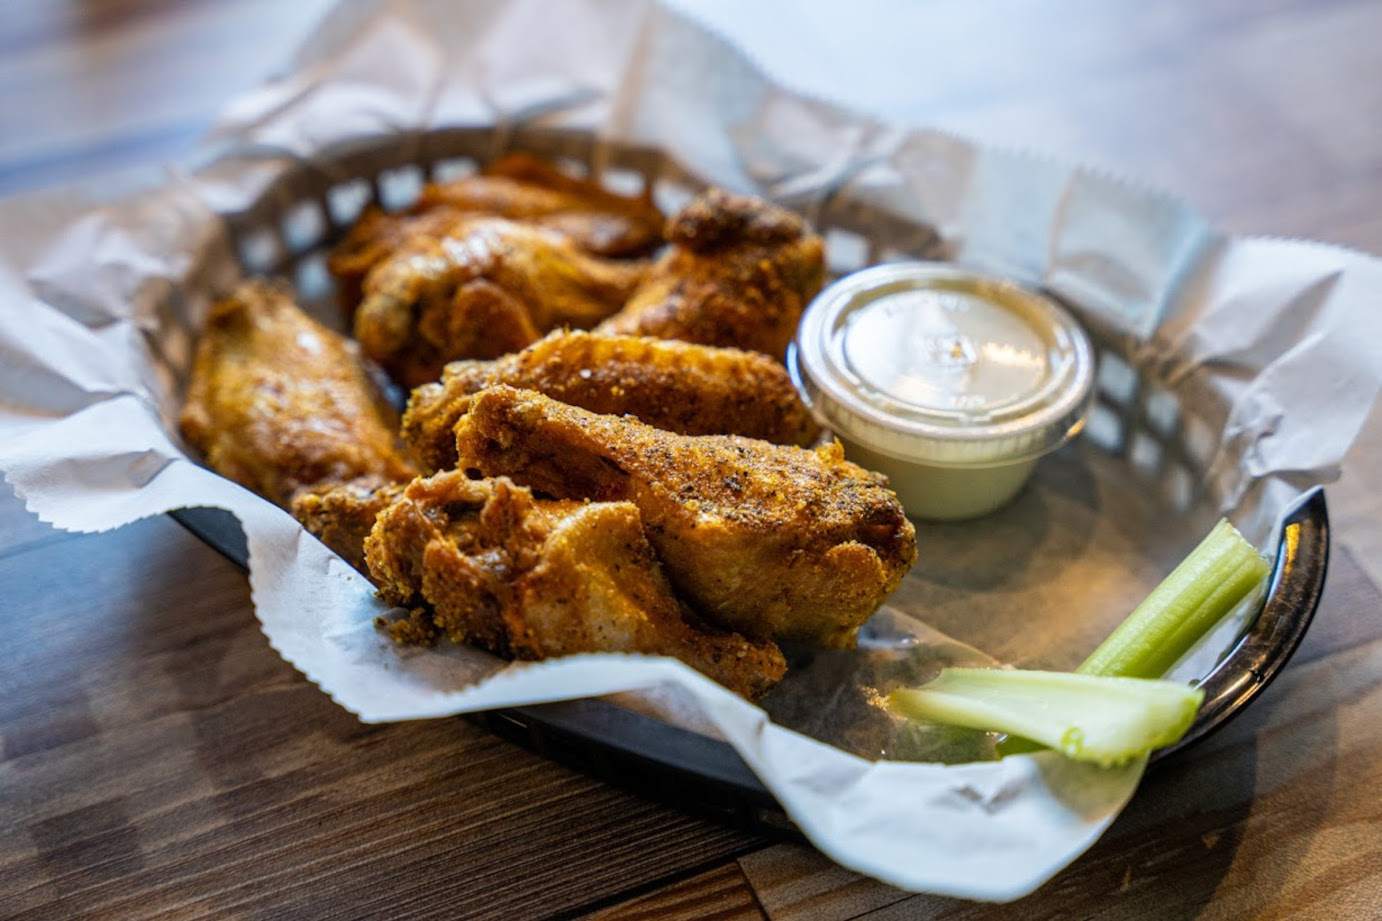 Chicken wings, served with sauce dip and celery